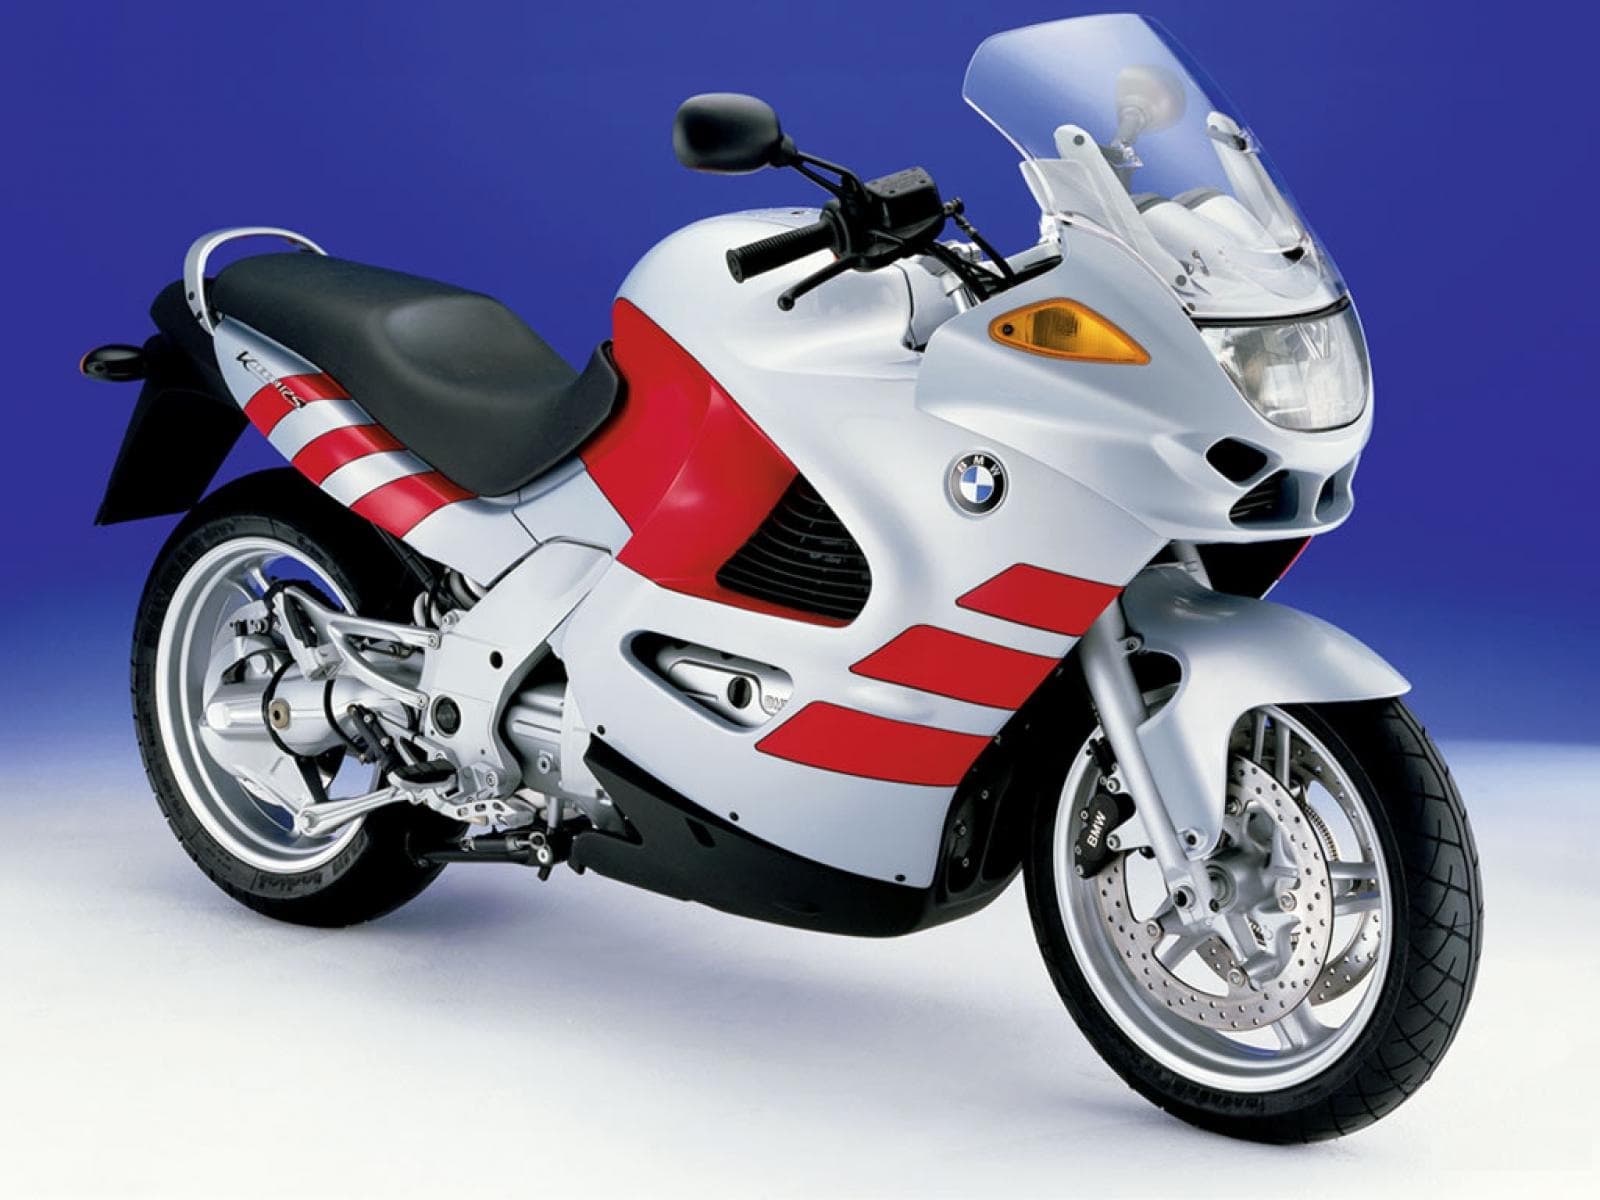 All About The Bmw K 1200 Rs: My First Sport Tourer